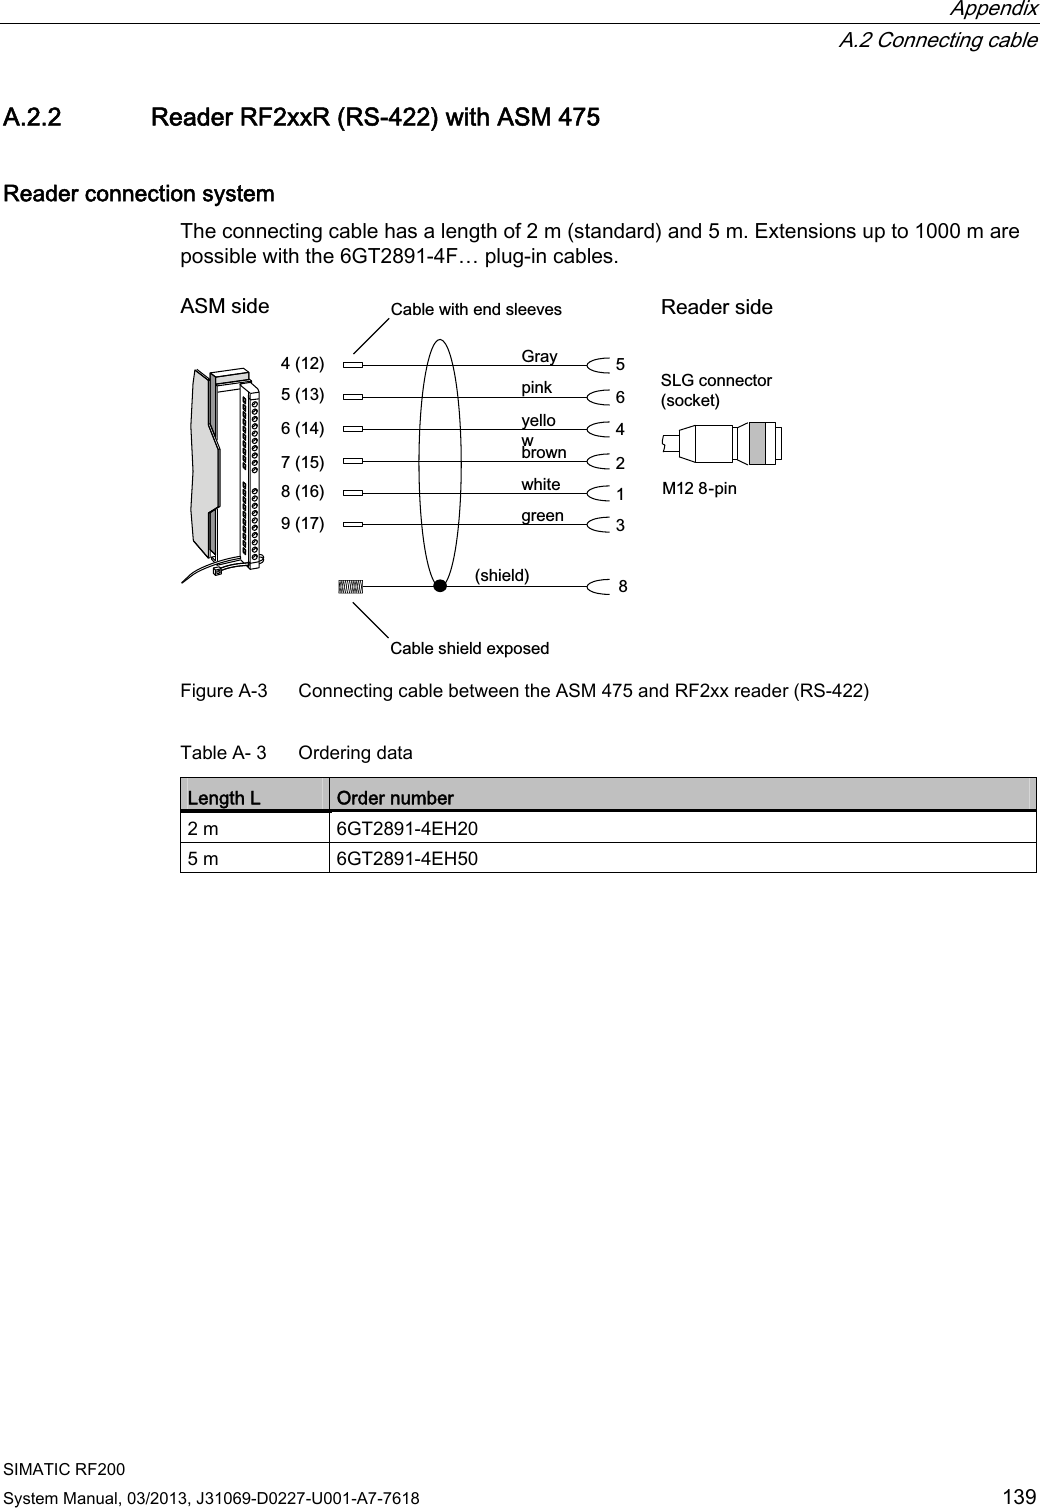  Appendix  A.2 Connecting cable SIMATIC RF200 System Manual, 03/2013, J31069-D0227-U001-A7-7618  139 A.2.2 Reader RF2xxR (RS-422) with ASM 475 Reader connection system The connecting cable has a length of 2 m (standard) and 5 m. Extensions up to 1000 m are possible with the 6GT2891-4F… plug-in cables.    &amp;DEOHZLWKHQGVOHHYHV*UD\SLQN\HOORZEURZQZKLWHVKLHOG&amp;DEOHVKLHOGH[SRVHG$60VLGH 5HDGHUVLGHJUHHQ6/*FRQQHFWRUVRFNHW0SLQ Figure A-3  Connecting cable between the ASM 475 and RF2xx reader (RS-422) Table A- 3  Ordering data Length L  Order number 2 m  6GT2891-4EH20 5 m  6GT2891-4EH50 